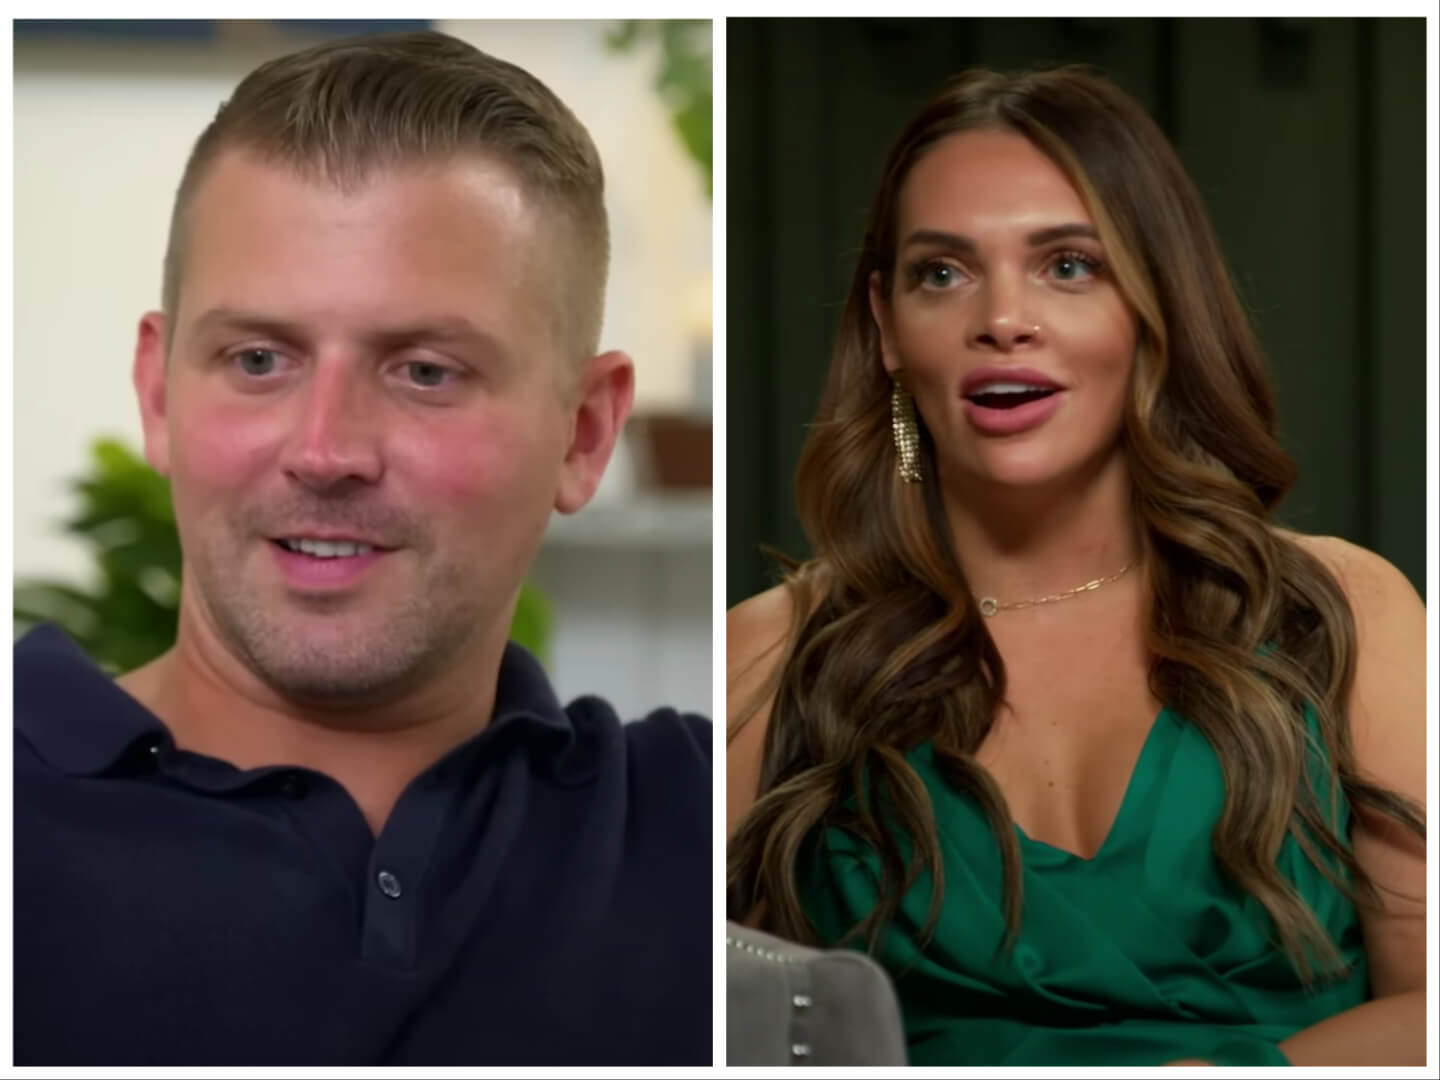 Side-by-side photos of Mackinley and Gina from 'Married at First Sight' Season 16